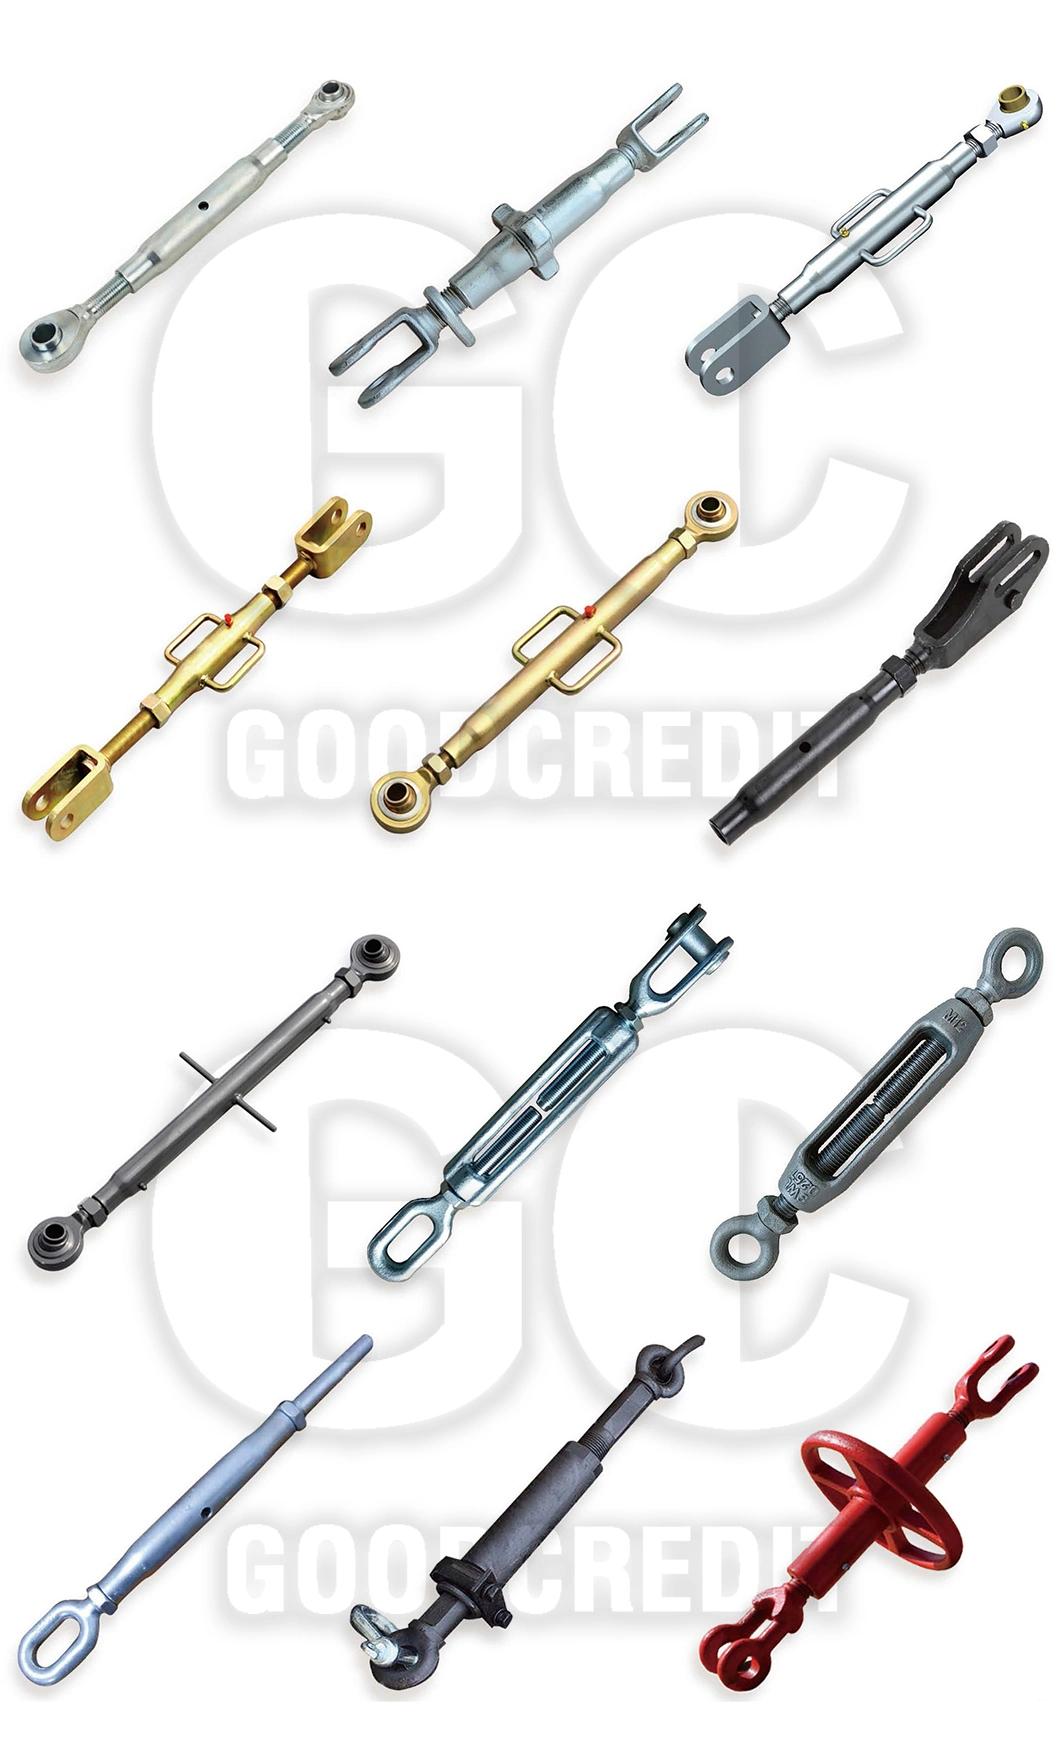 Commercial Type Eye and Hook Malleable Turnbuckle DIN1480 Turnbuckle Us Forged Turnbuckle